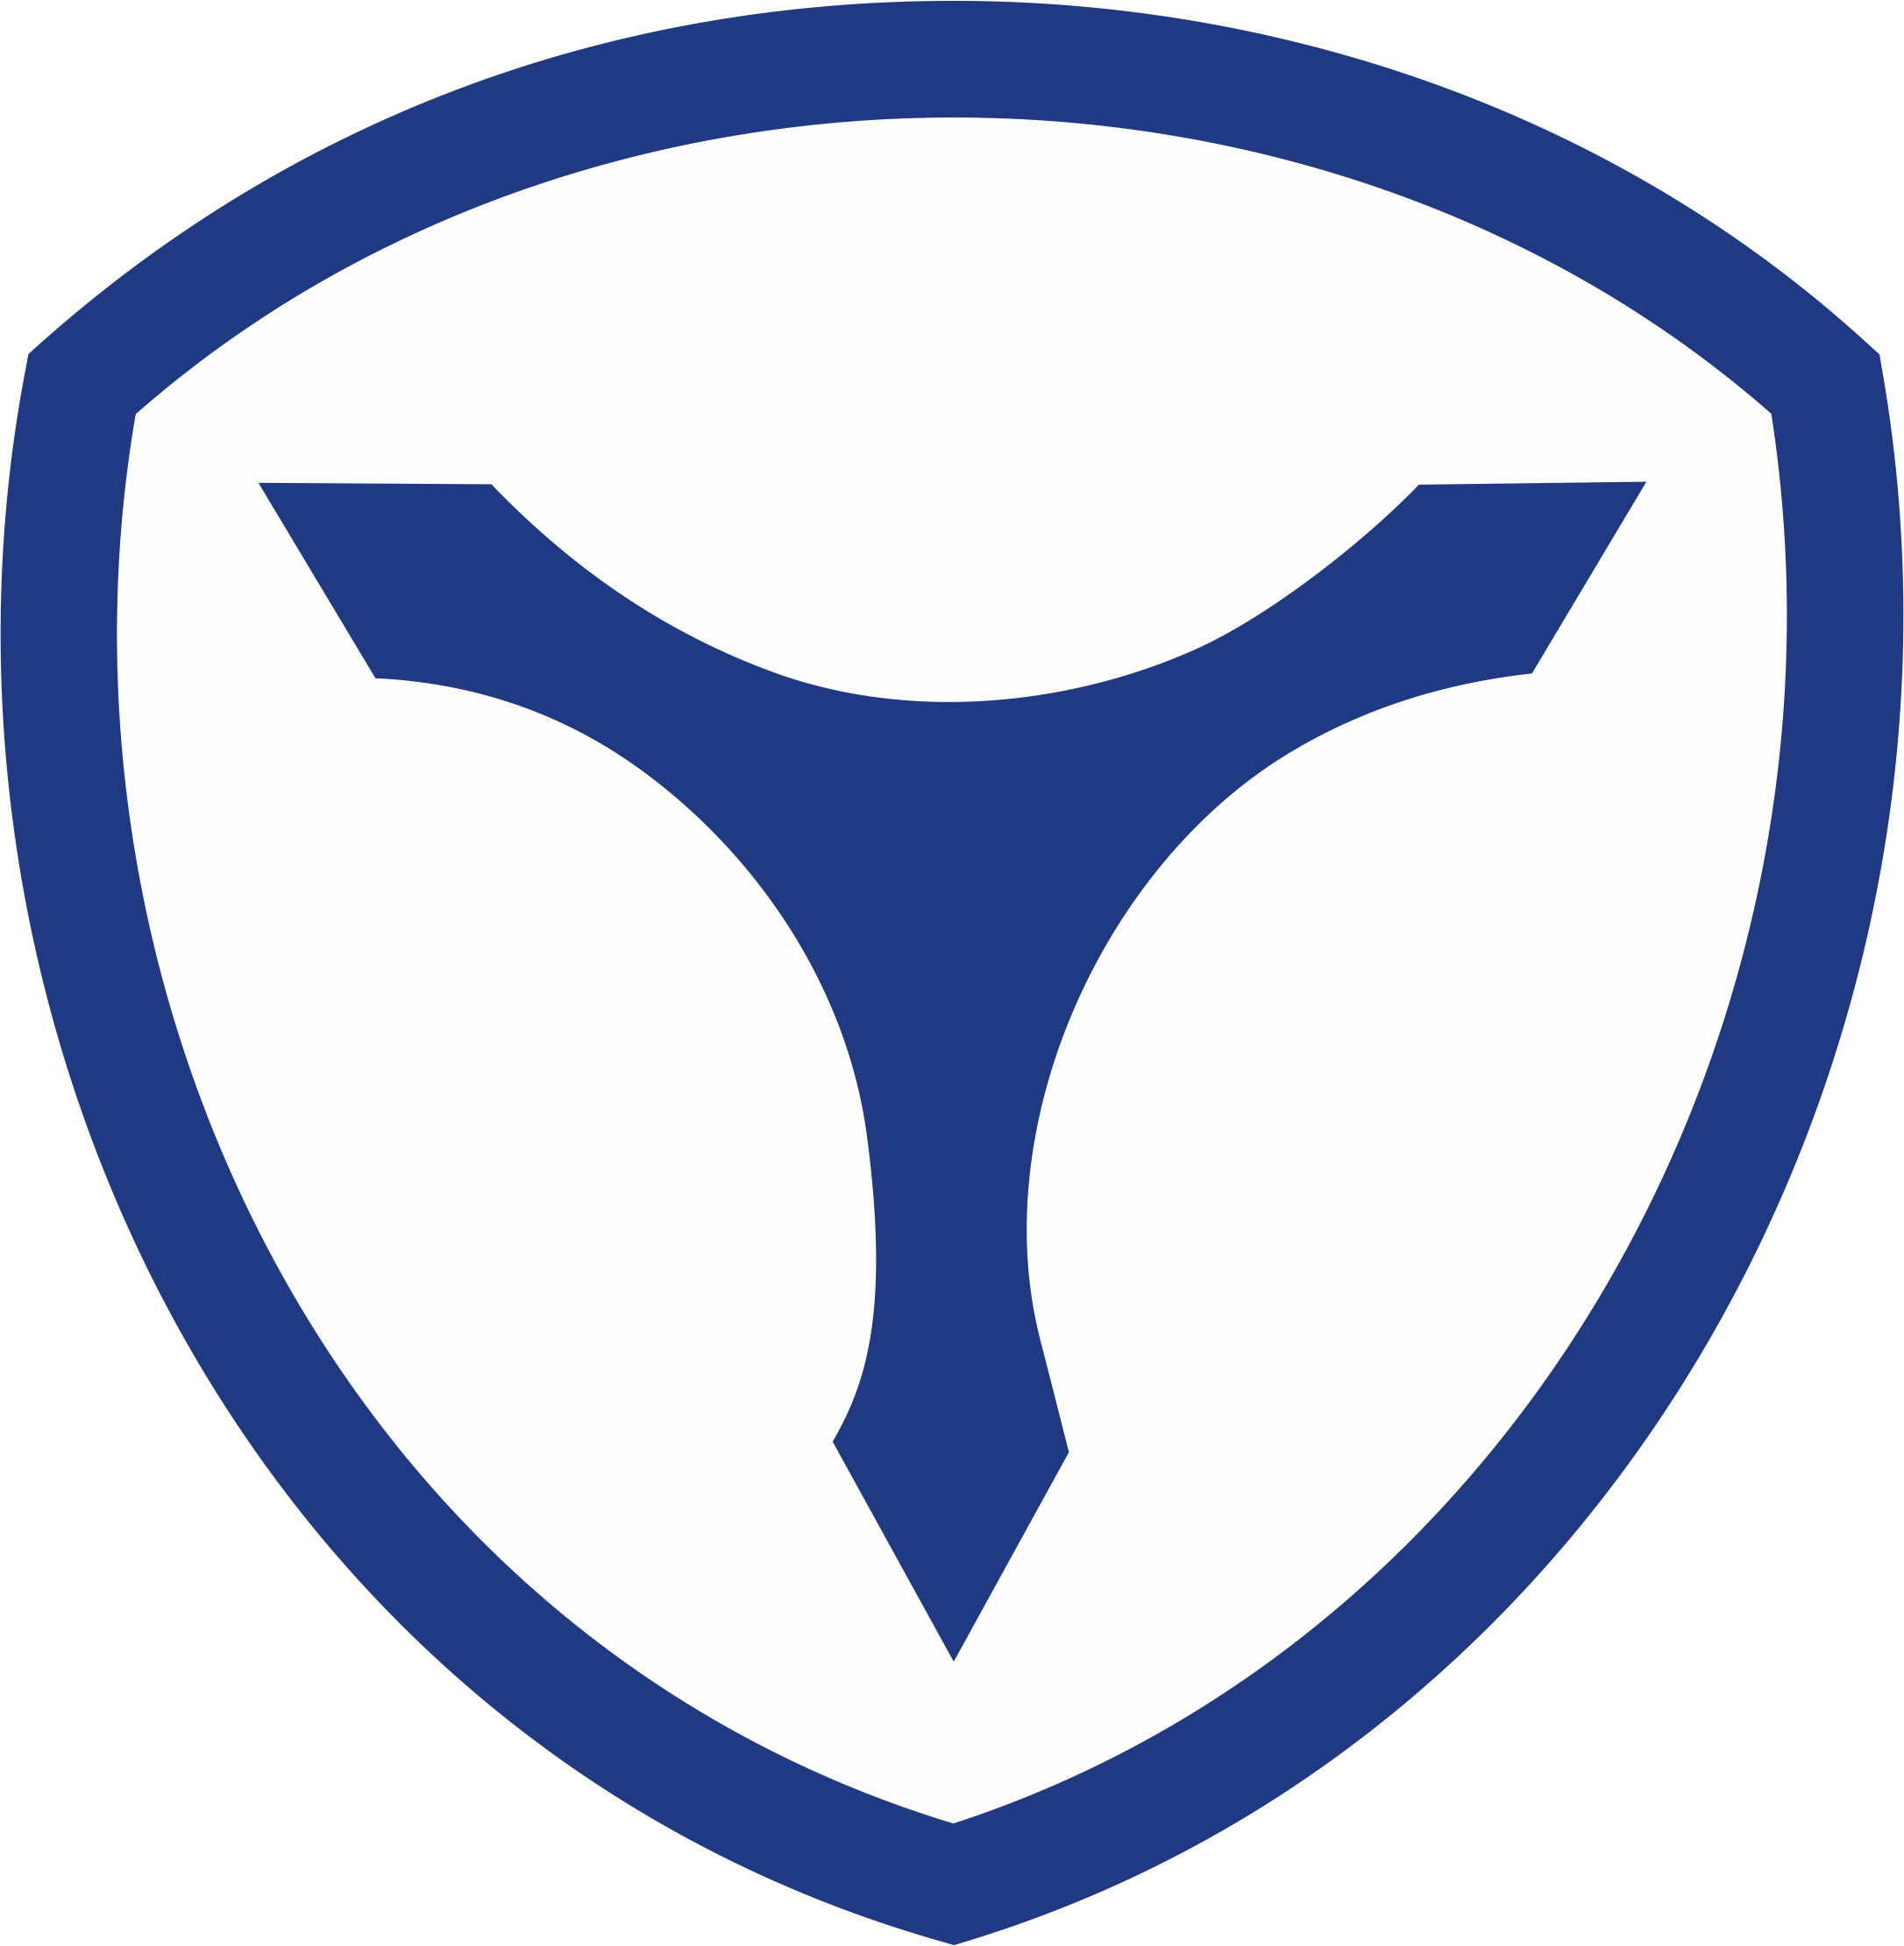  3rd Corps Area Service Command SVG